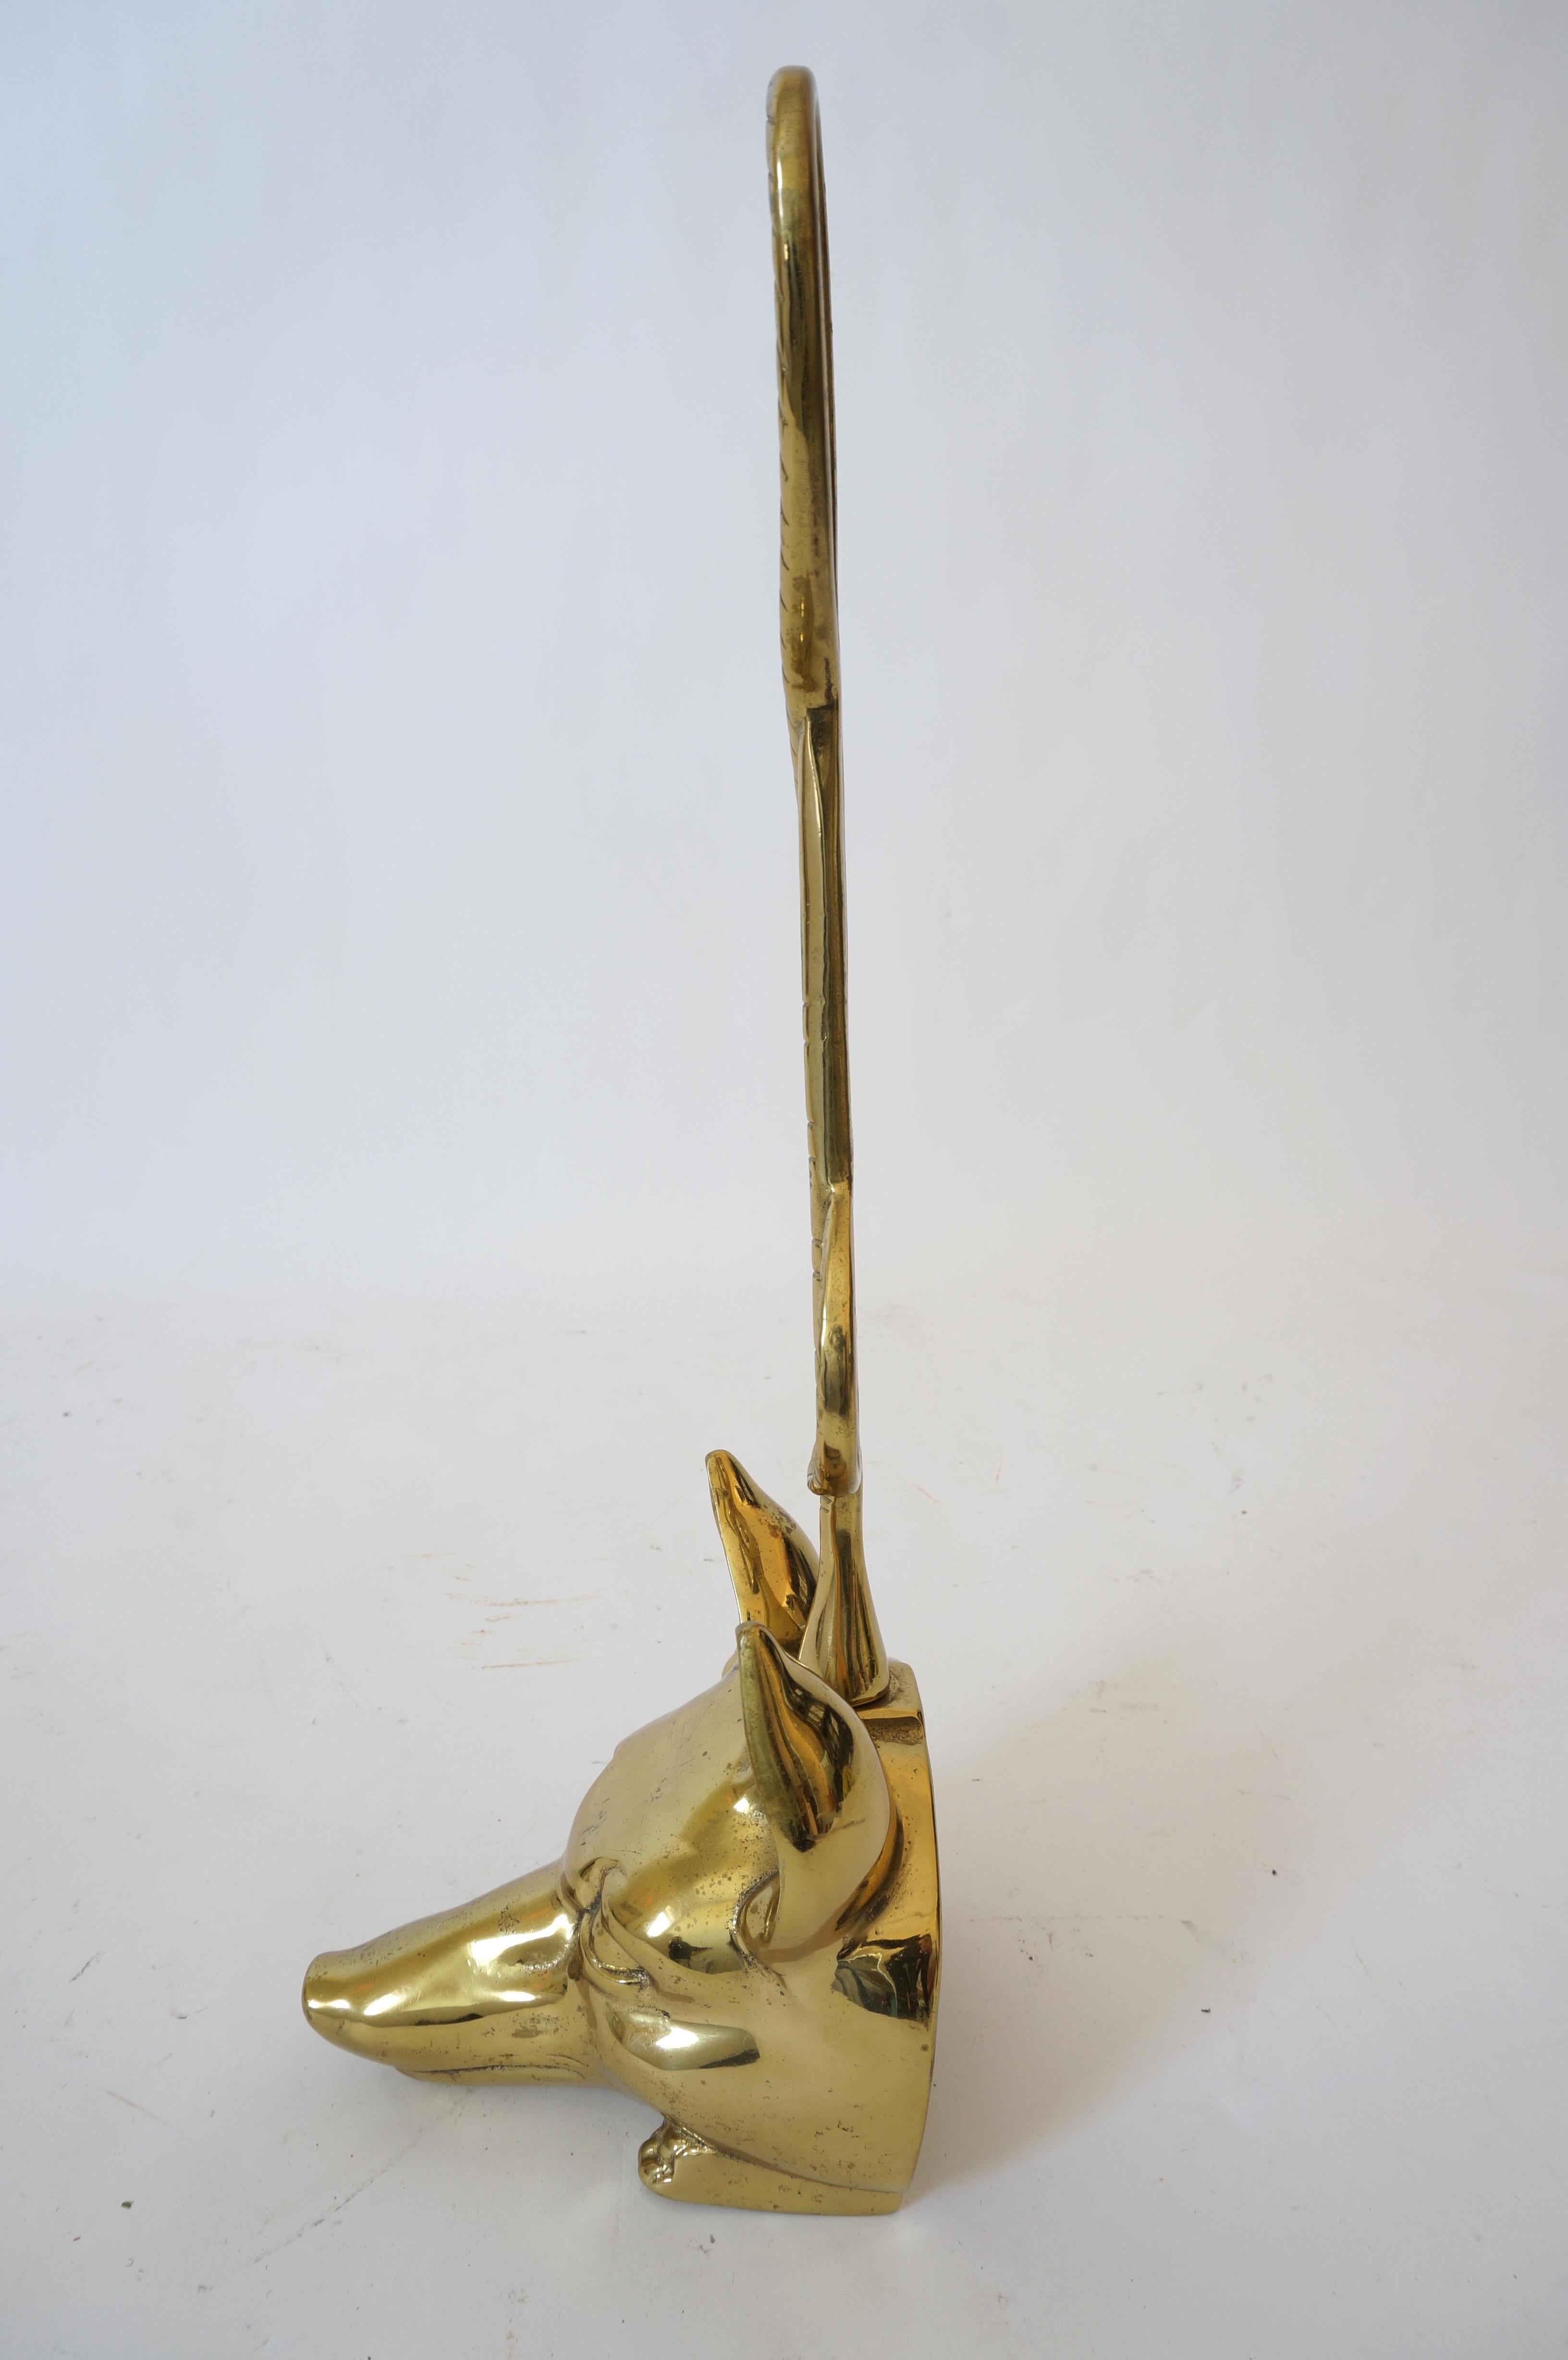 American Brass Door Stop with Fox and Riding Crop